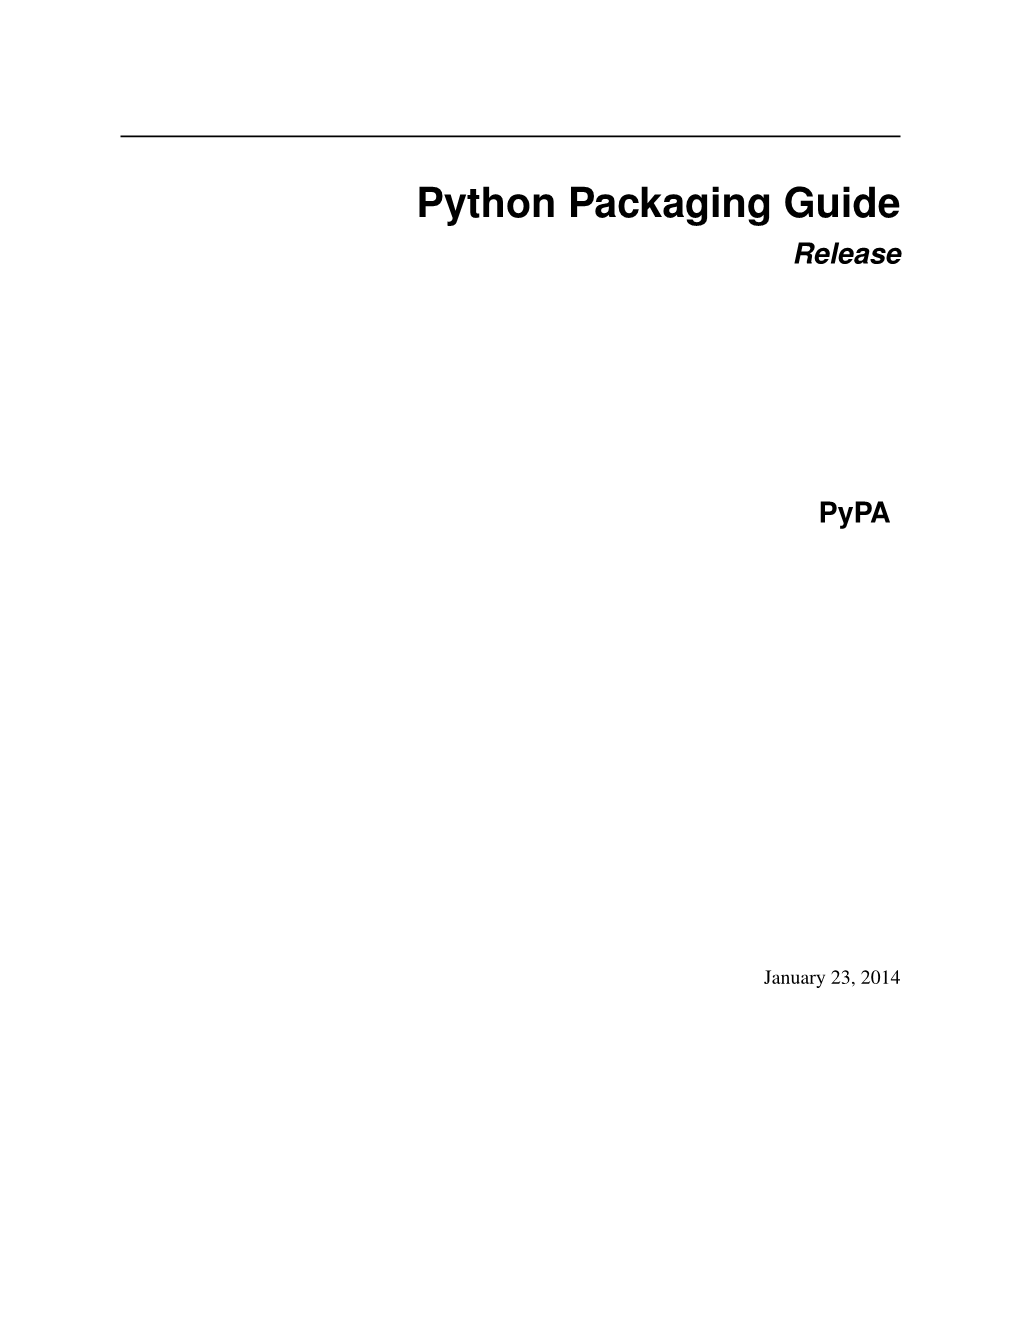 Python Packaging Guide Release